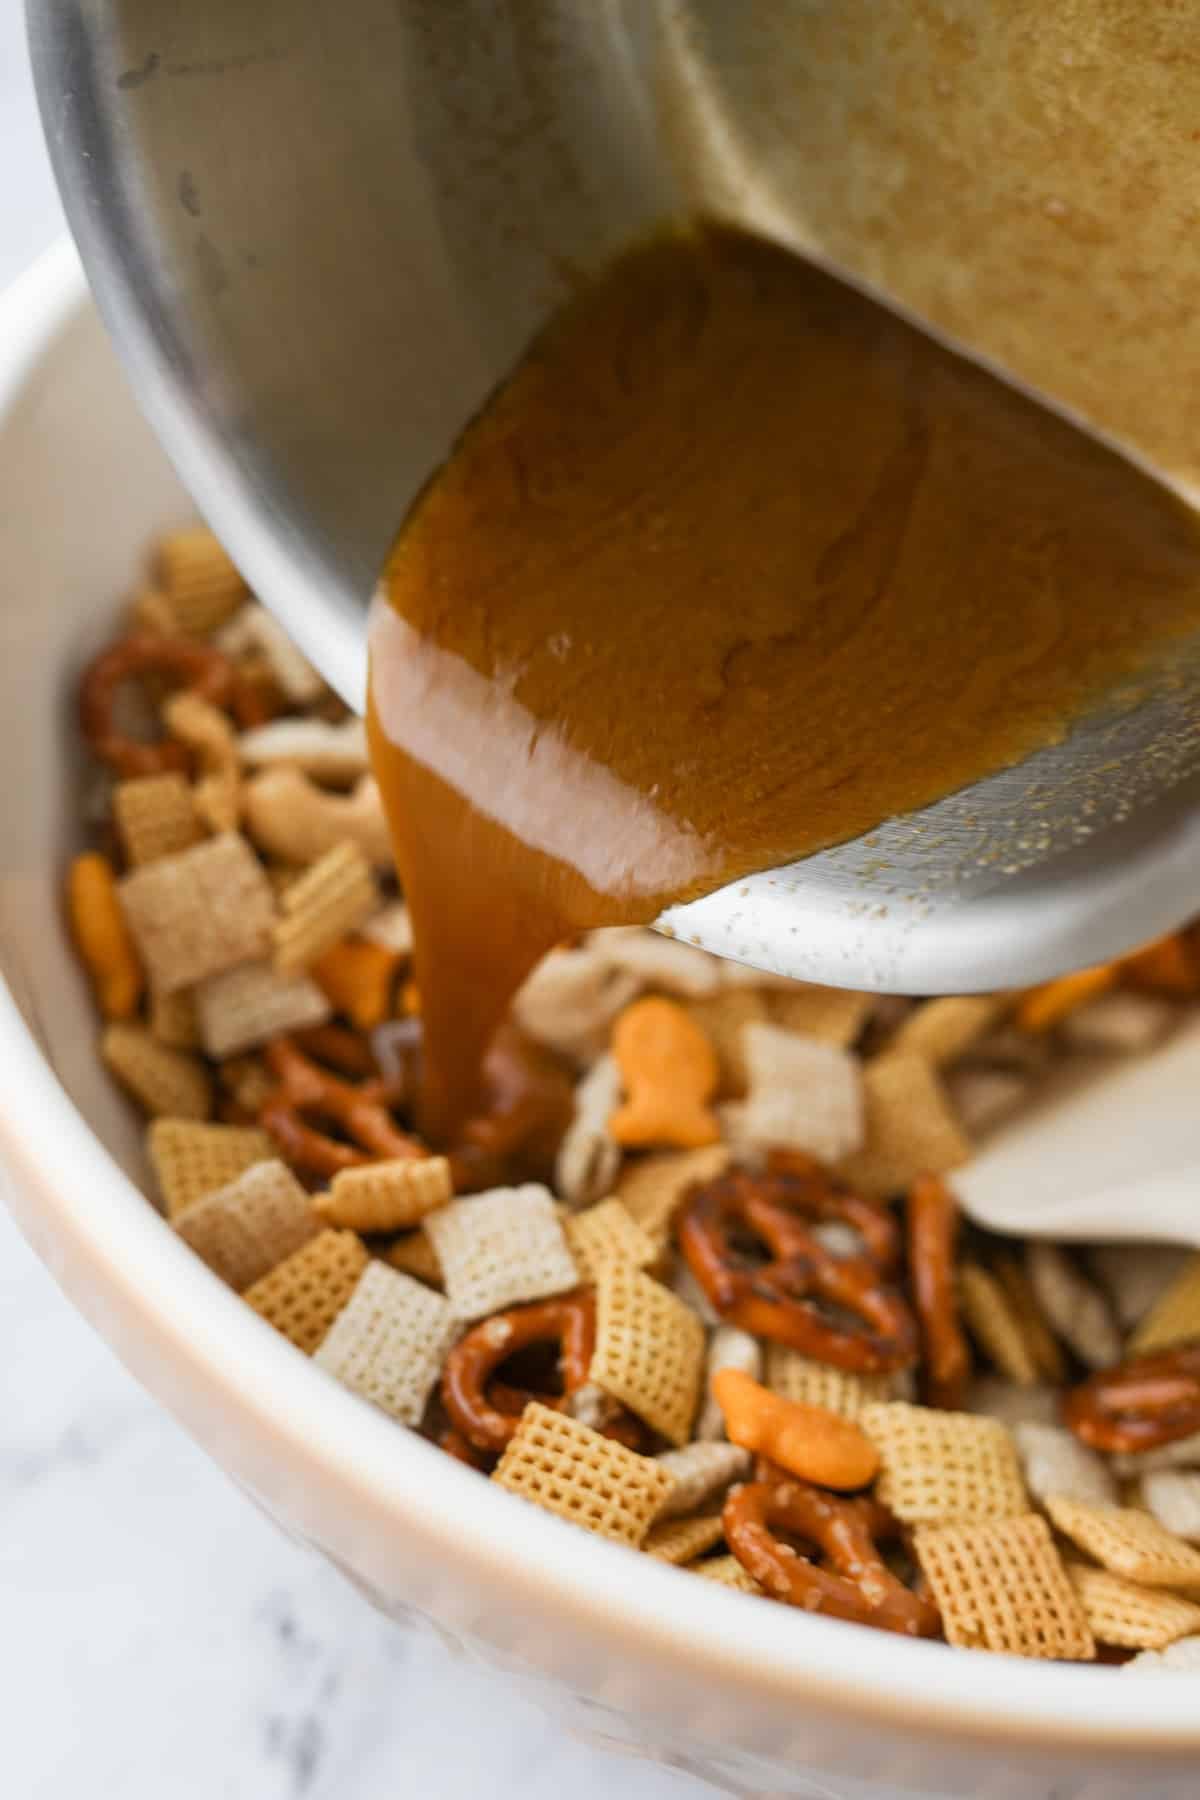 Pouring butter and seasonings over a dry snack mix in a large bowl.